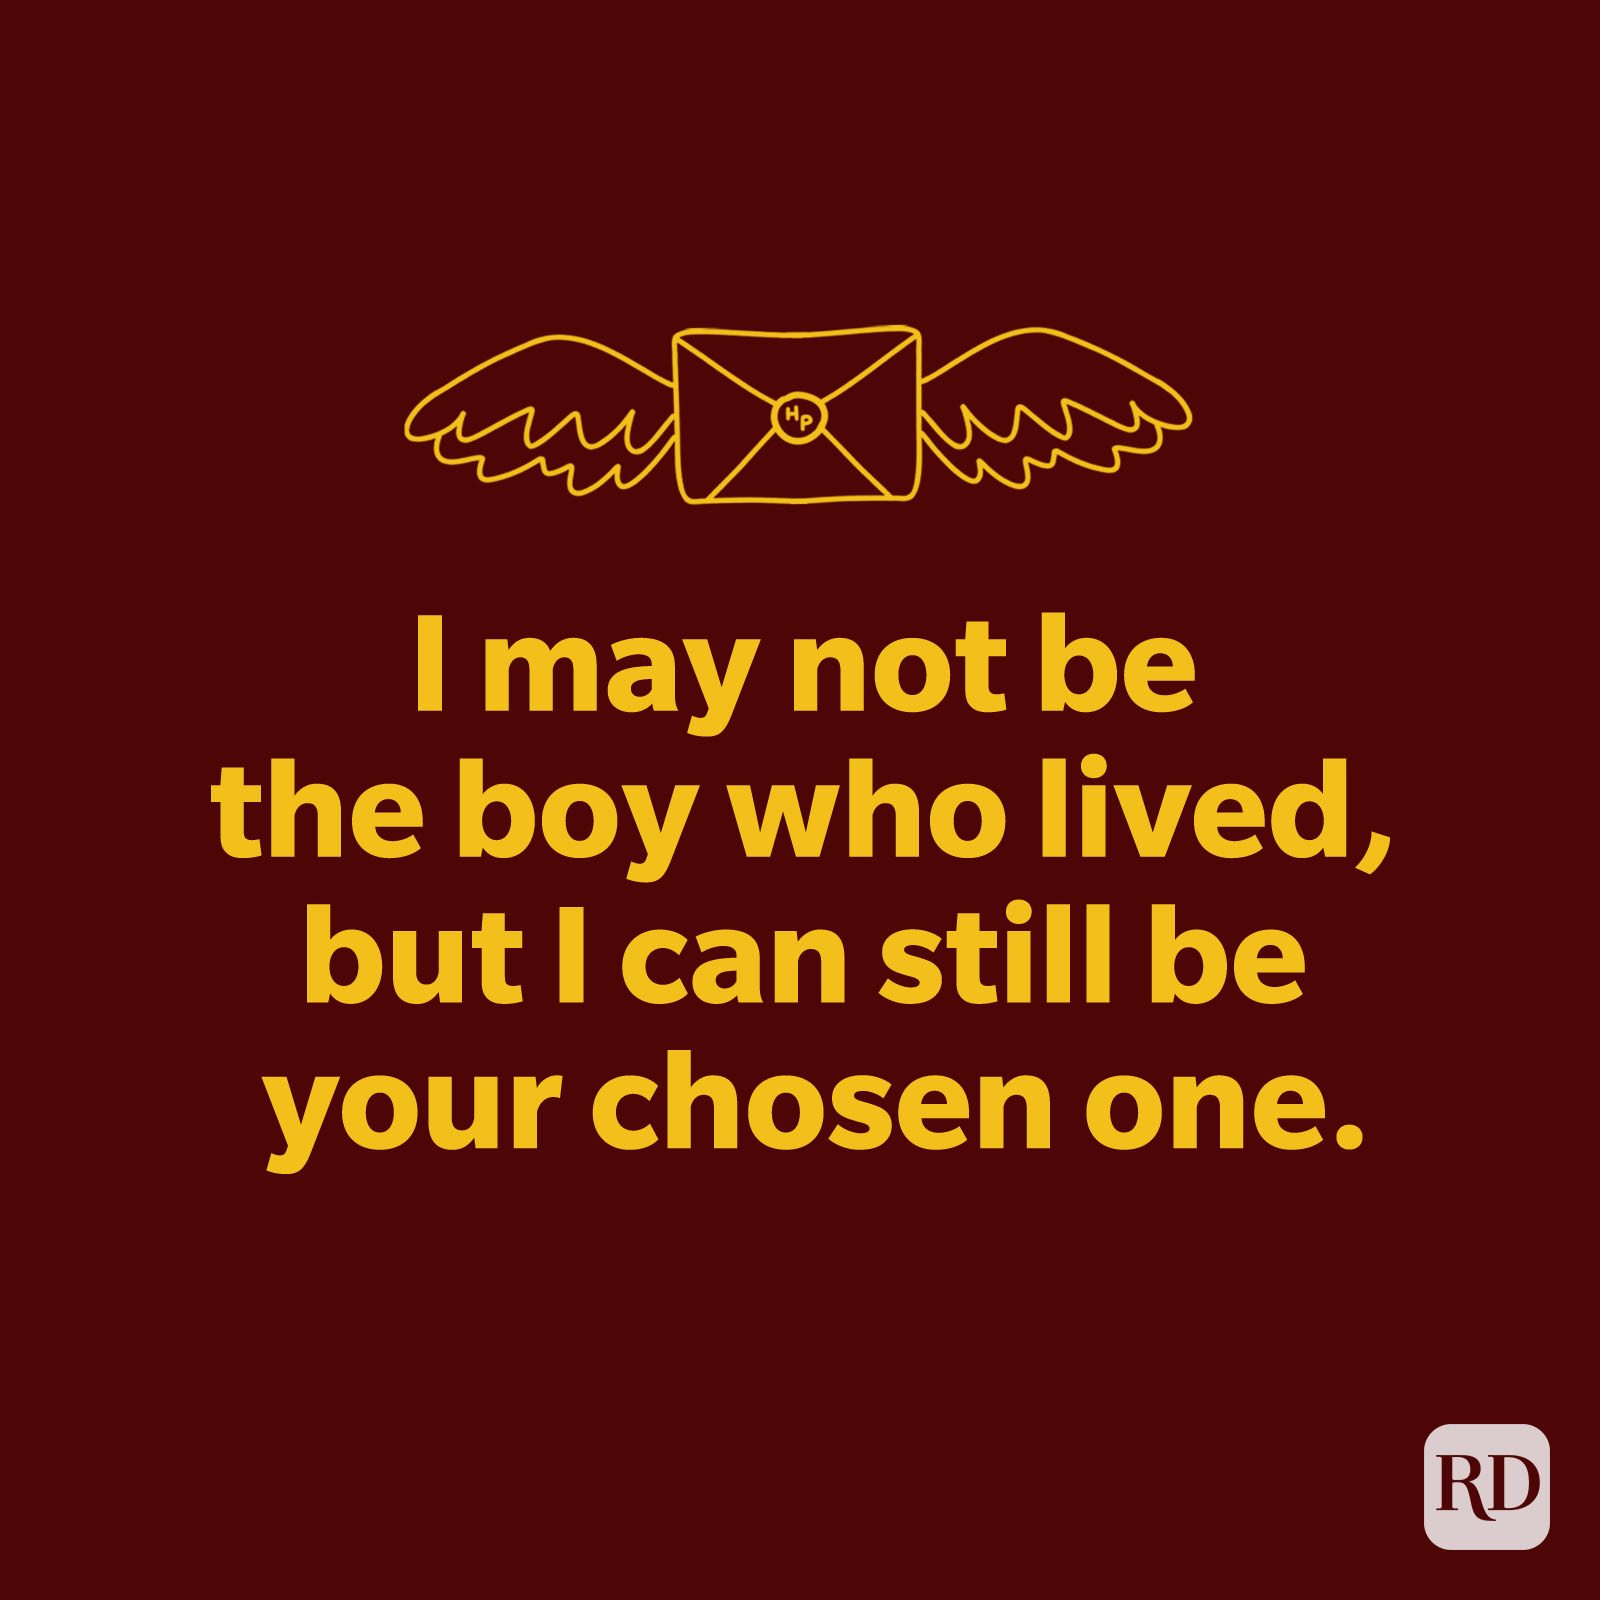 I may not be the boy who lived, but I can still be your chosen one.